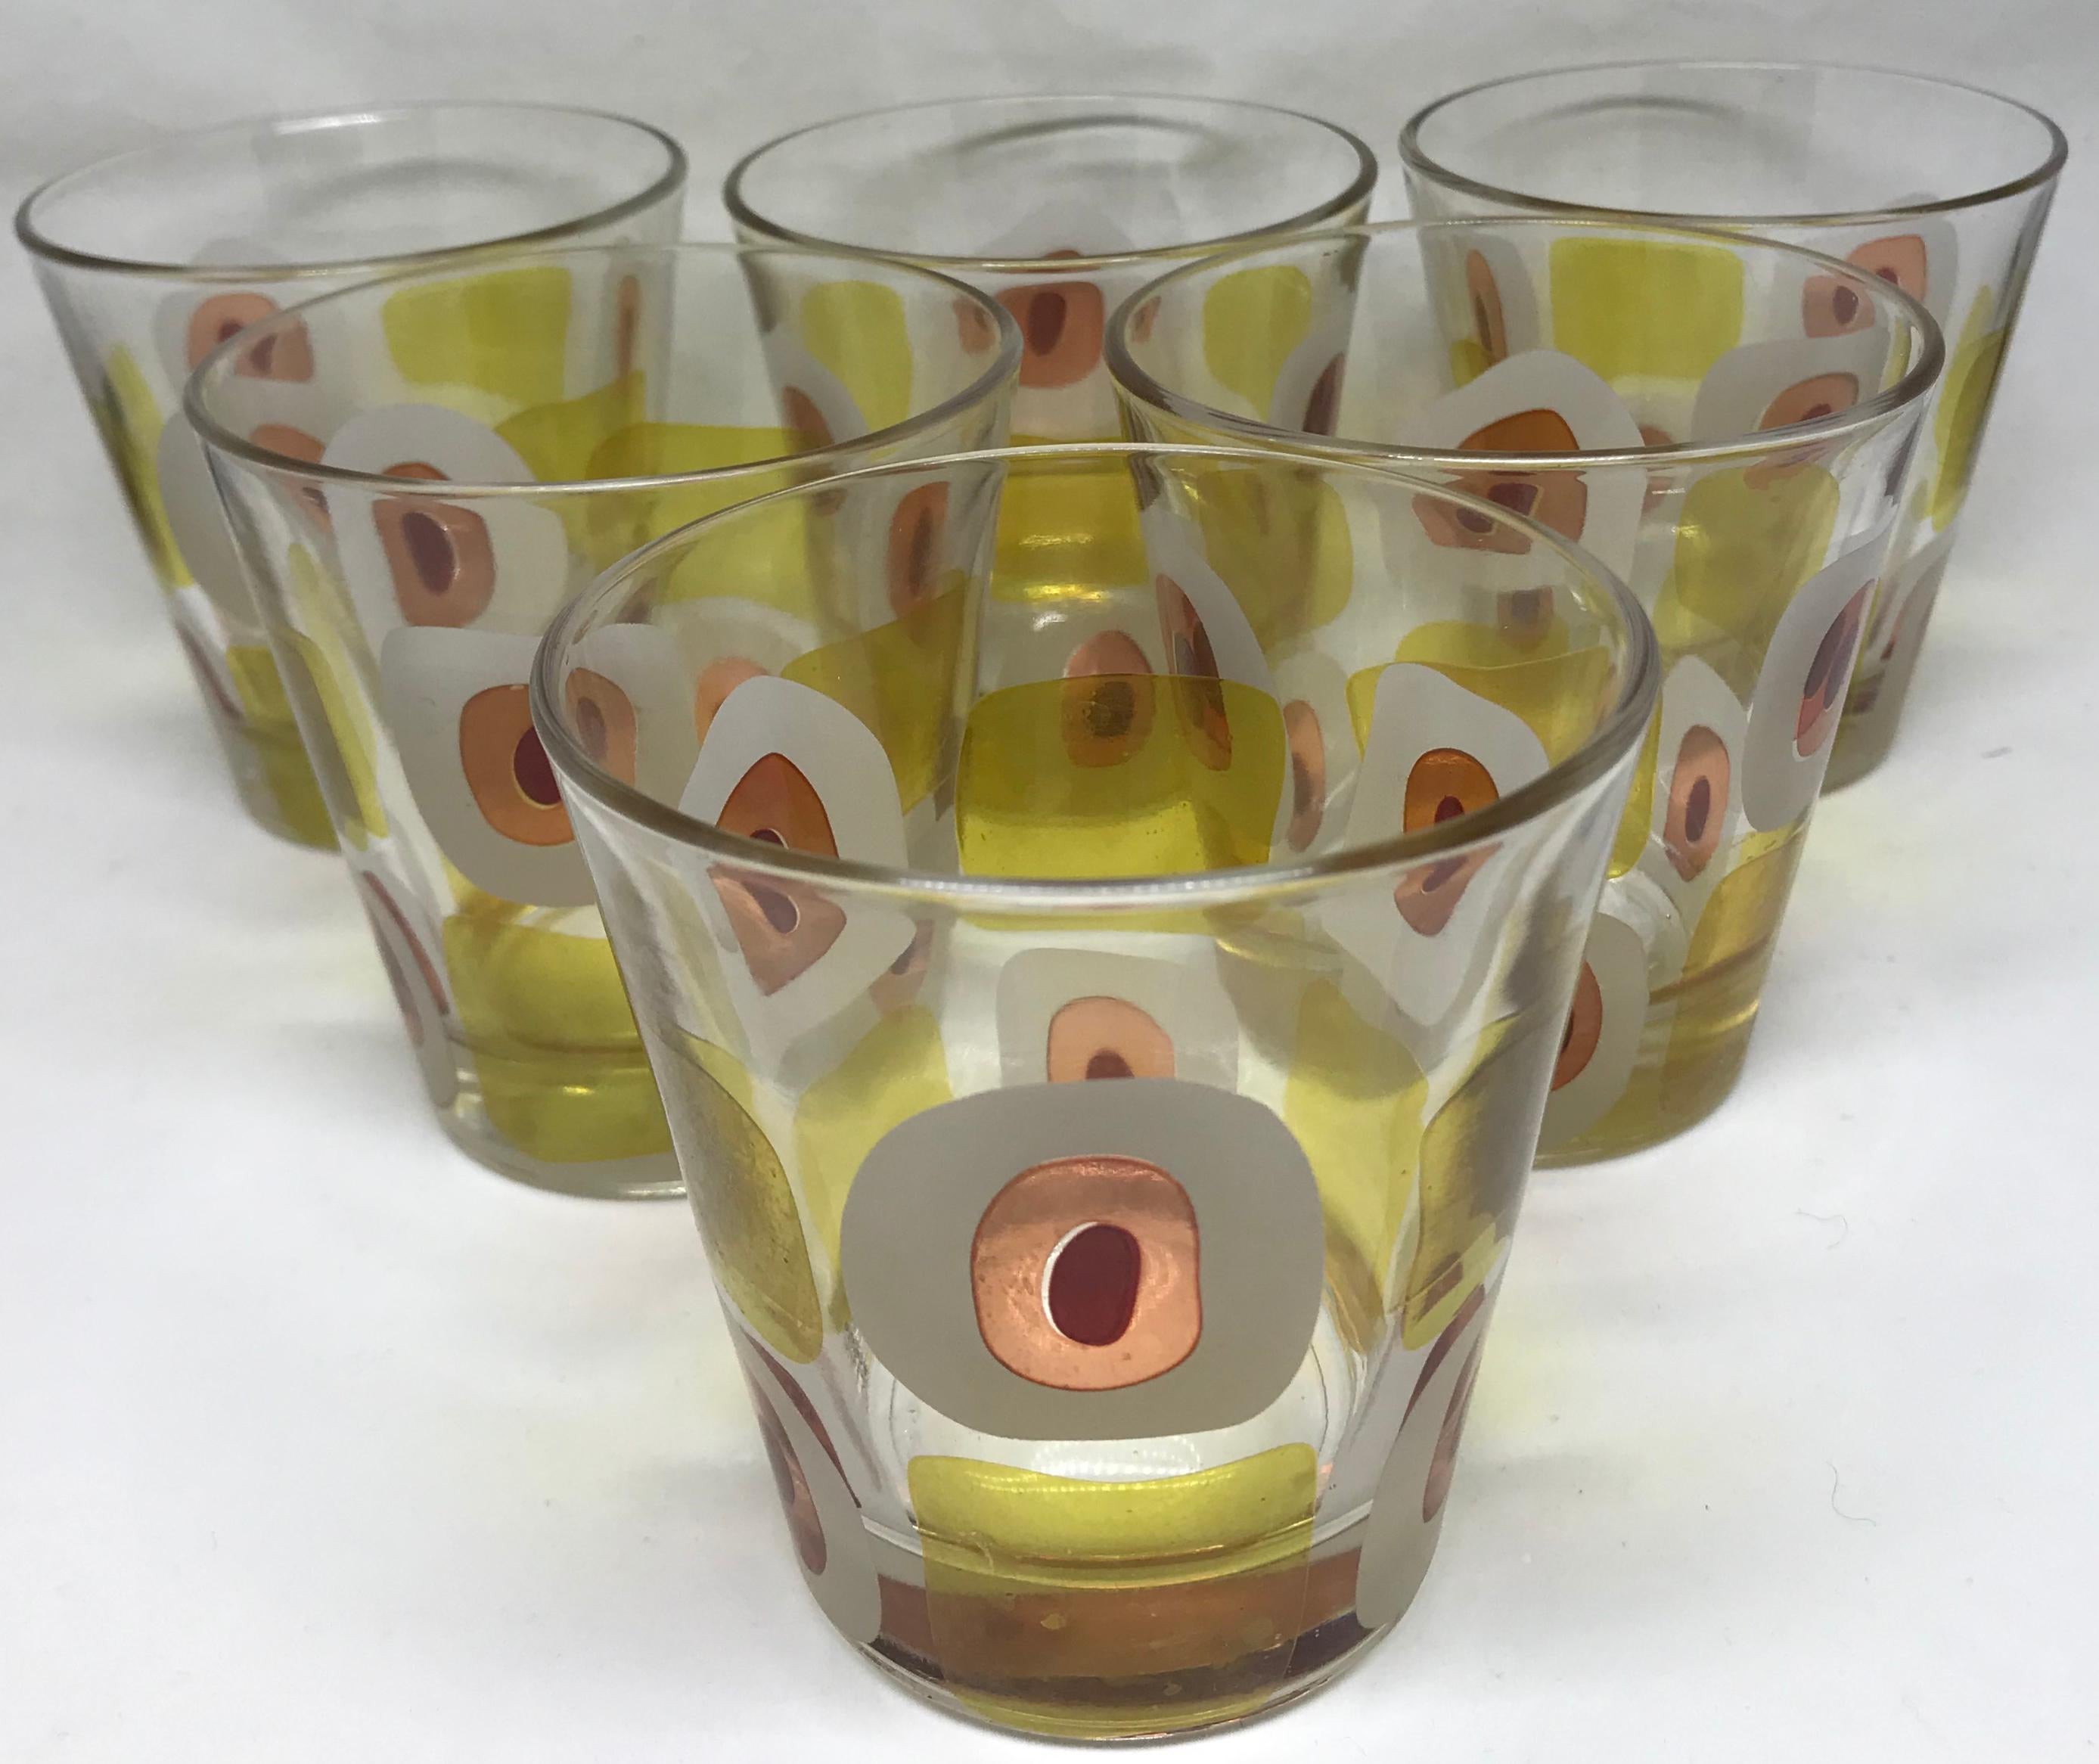 Set of six Mid-Century Modern Italian glasses. Six vintage bold sixties-style patterned glasses in yellow, red and opaque white. Marked and stamped 